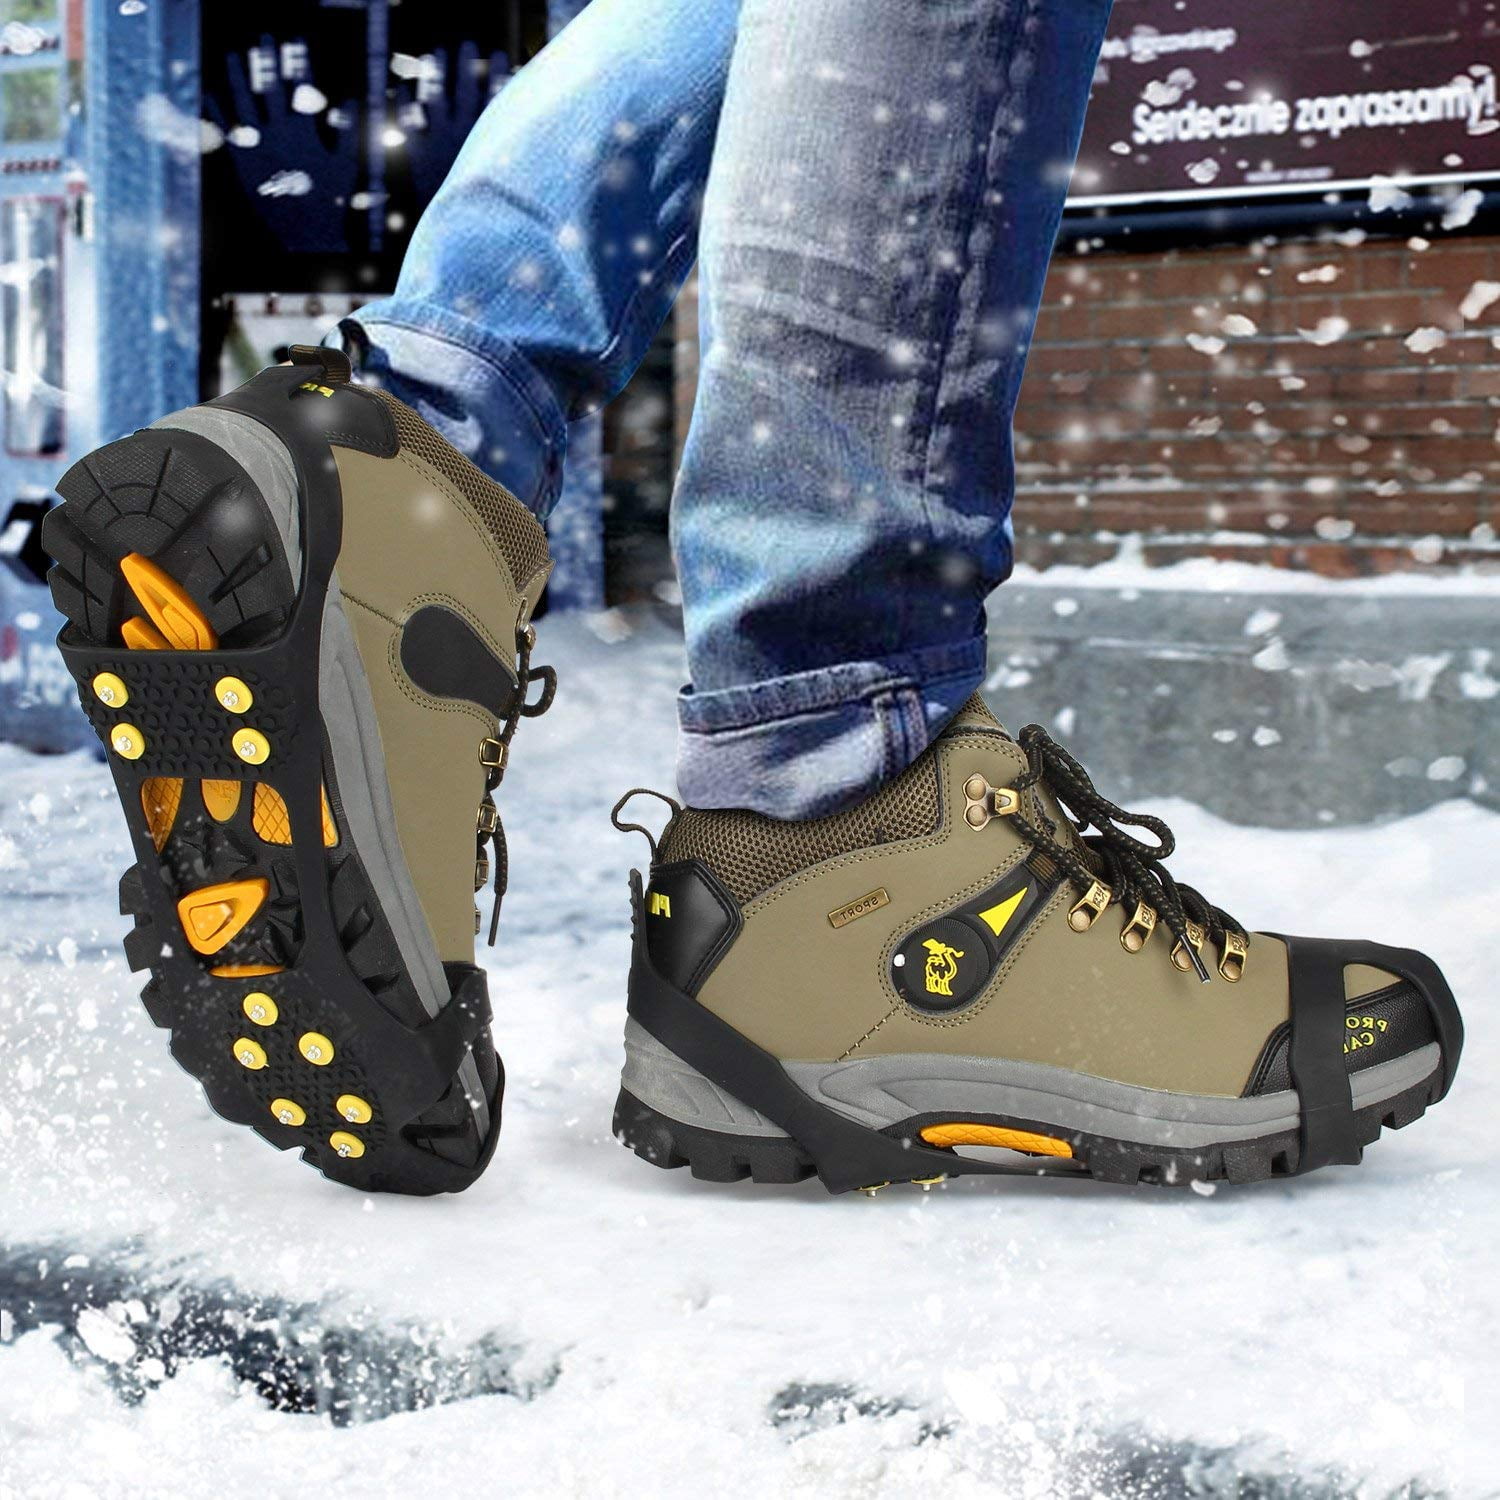 CRAMPONS OVER BOOTS SHOES snow ice cleats metal studs  RRP £9.99 